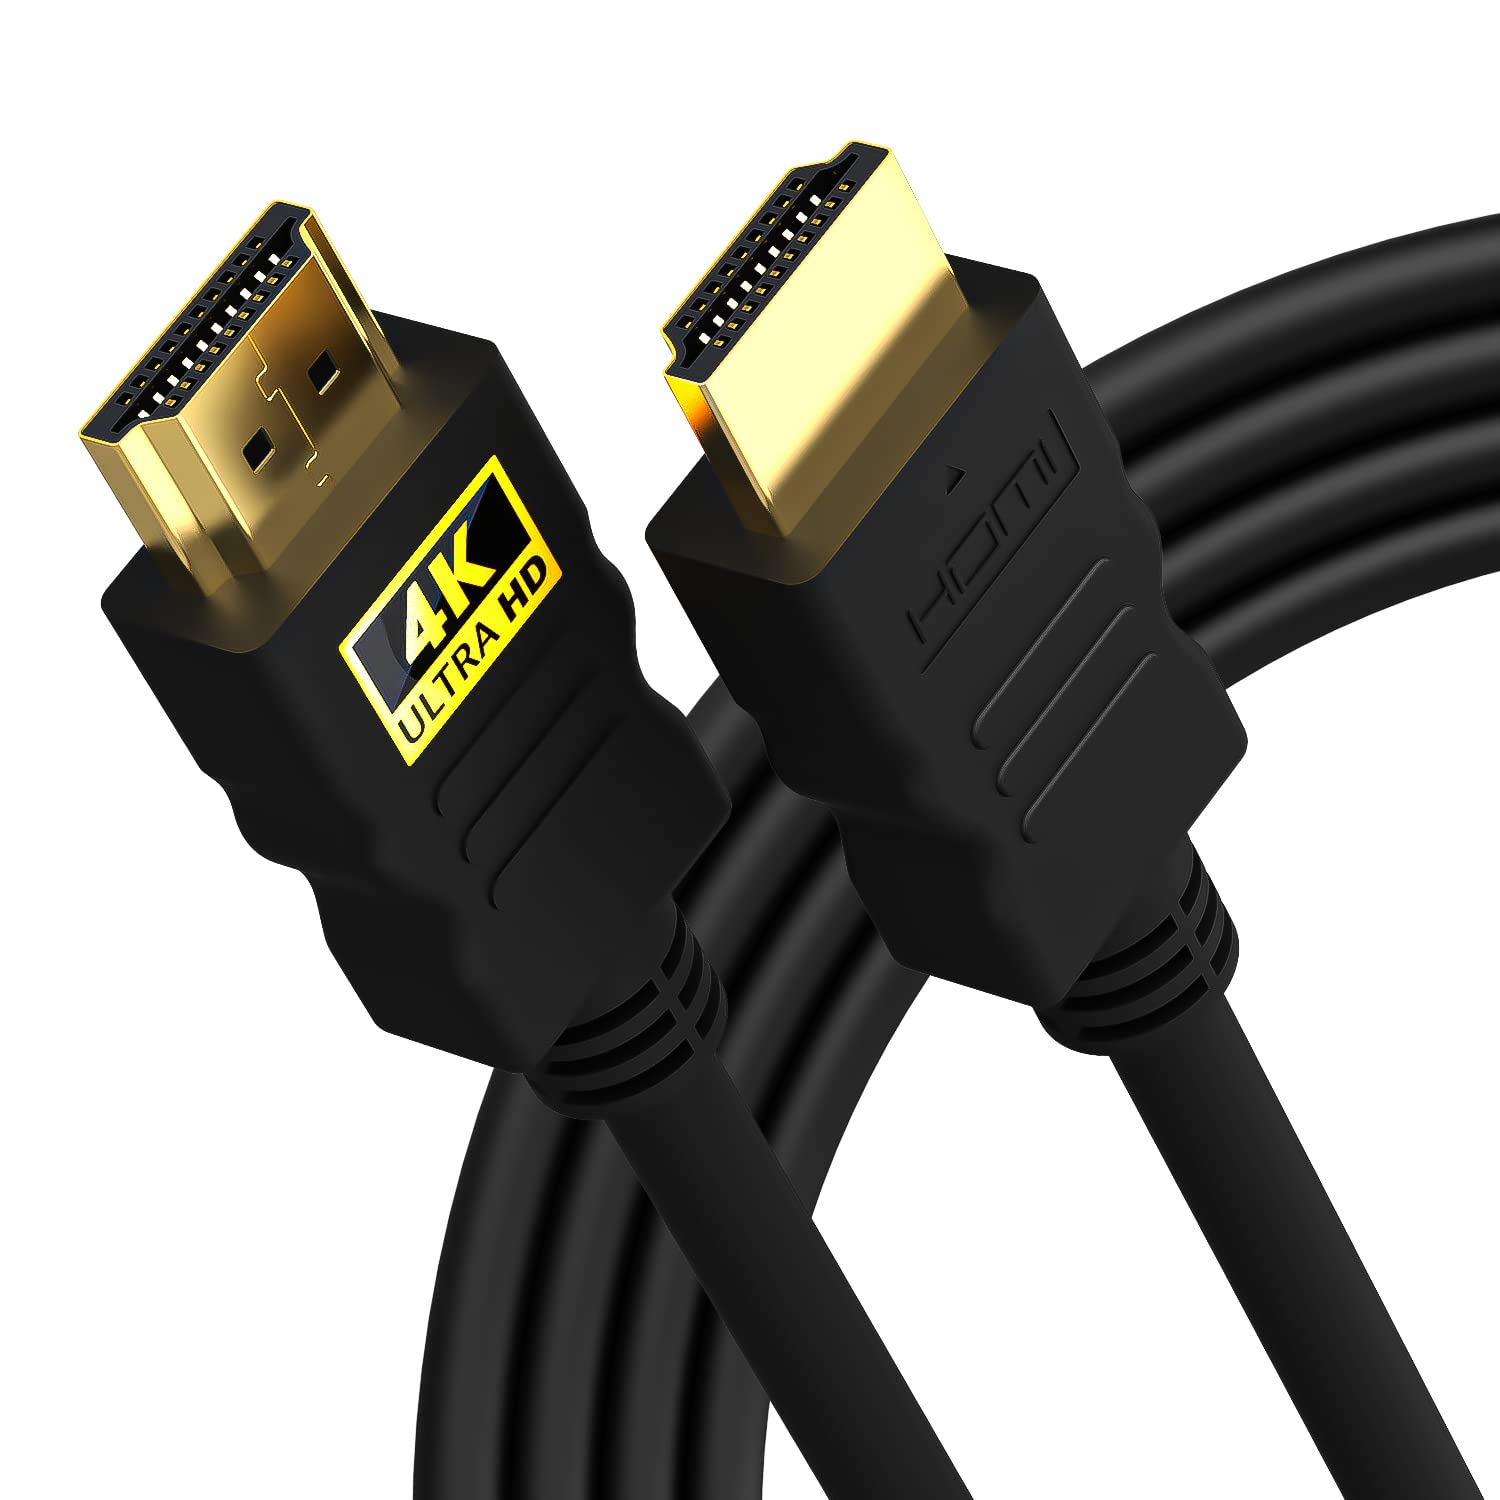 Inspect the HDMI cables for any visible damage or loose connections.
Disconnect and reconnect the HDMI cables on both the TV and the connected device.